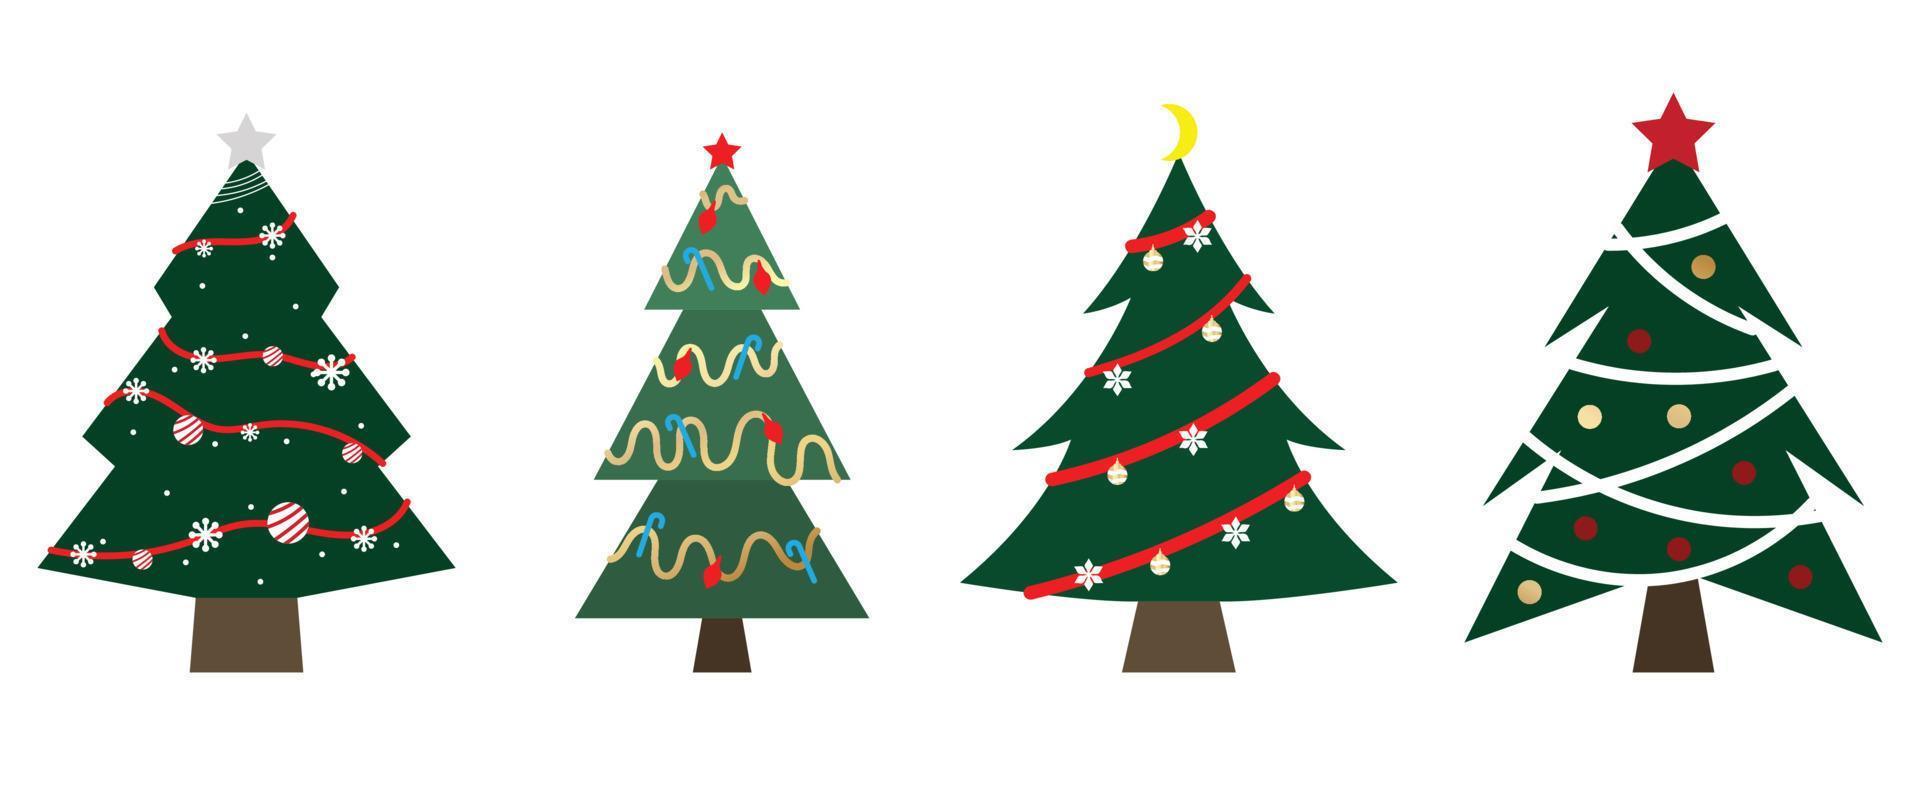 Set of decorated christmas trees vector. Collection of ornamental christmas trees with garland, tinsel, baubles, star on white background. Design illustration for decoration, card, sticker, poster. vector